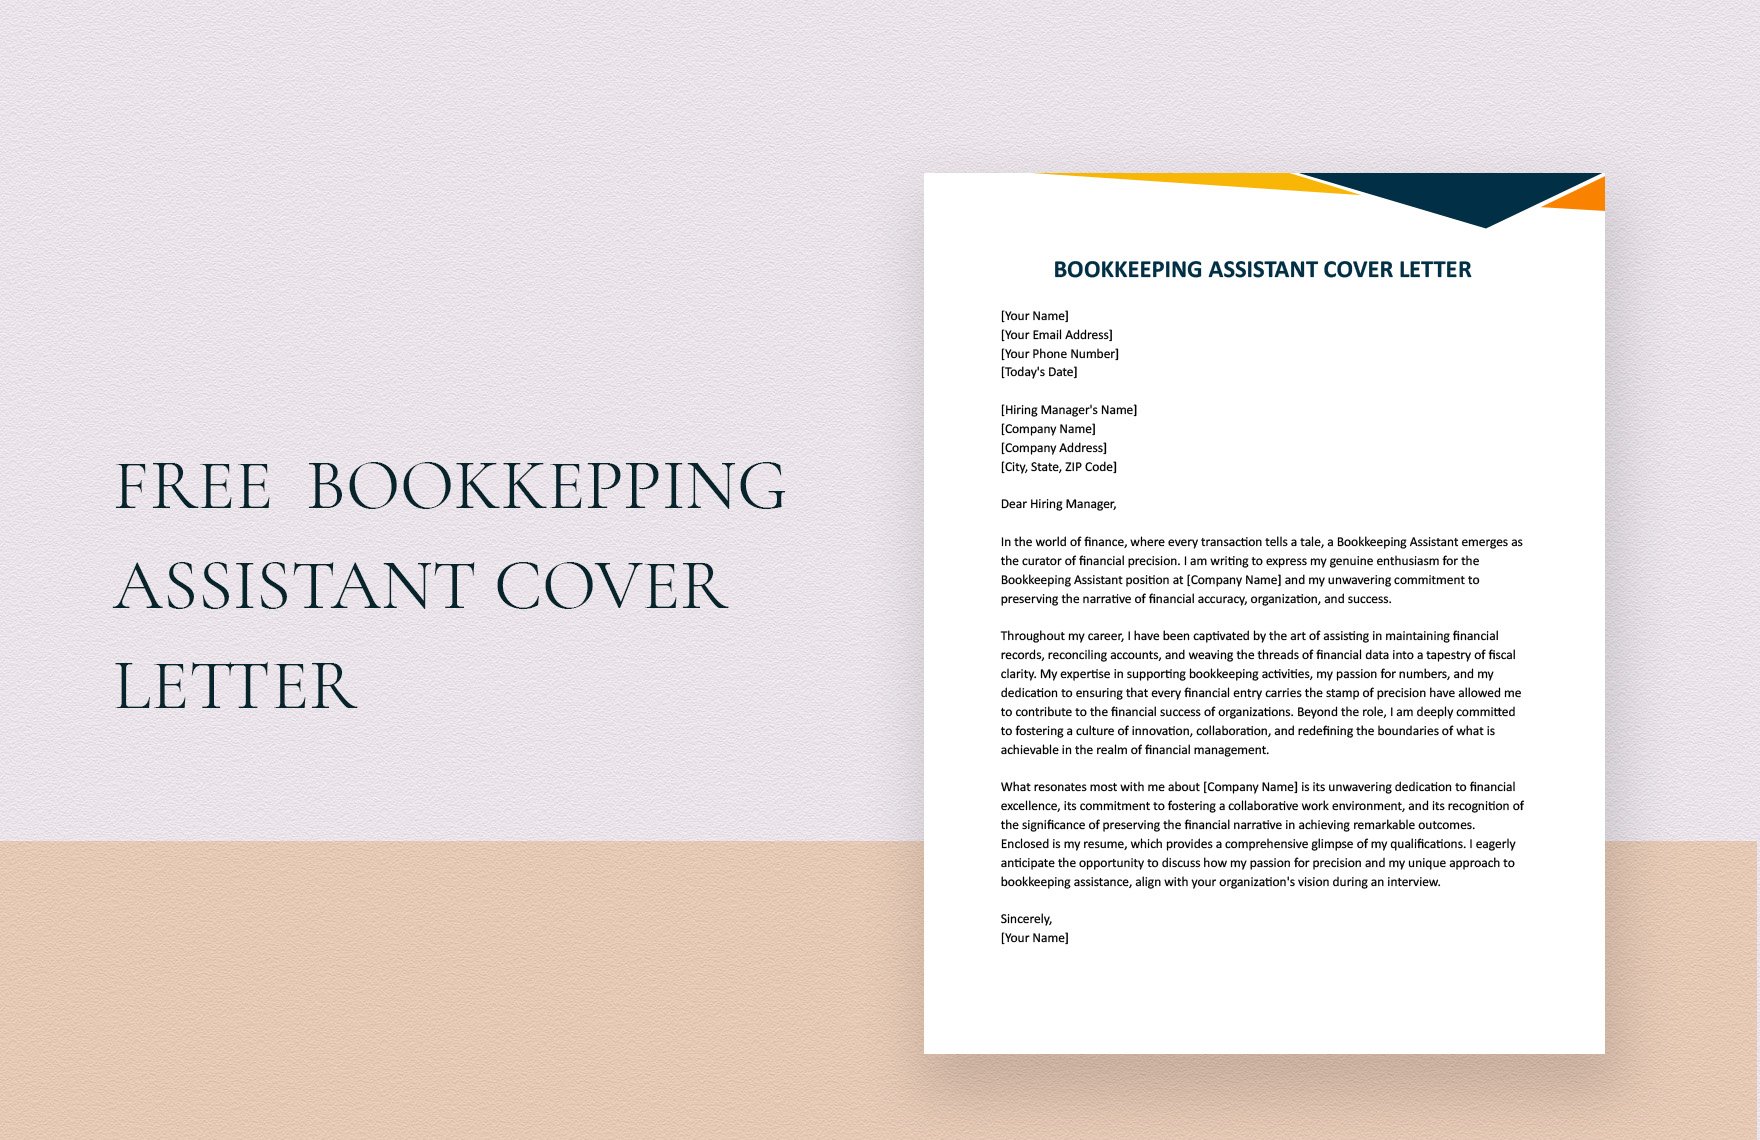 Bookkeeping Assistant Cover Letter